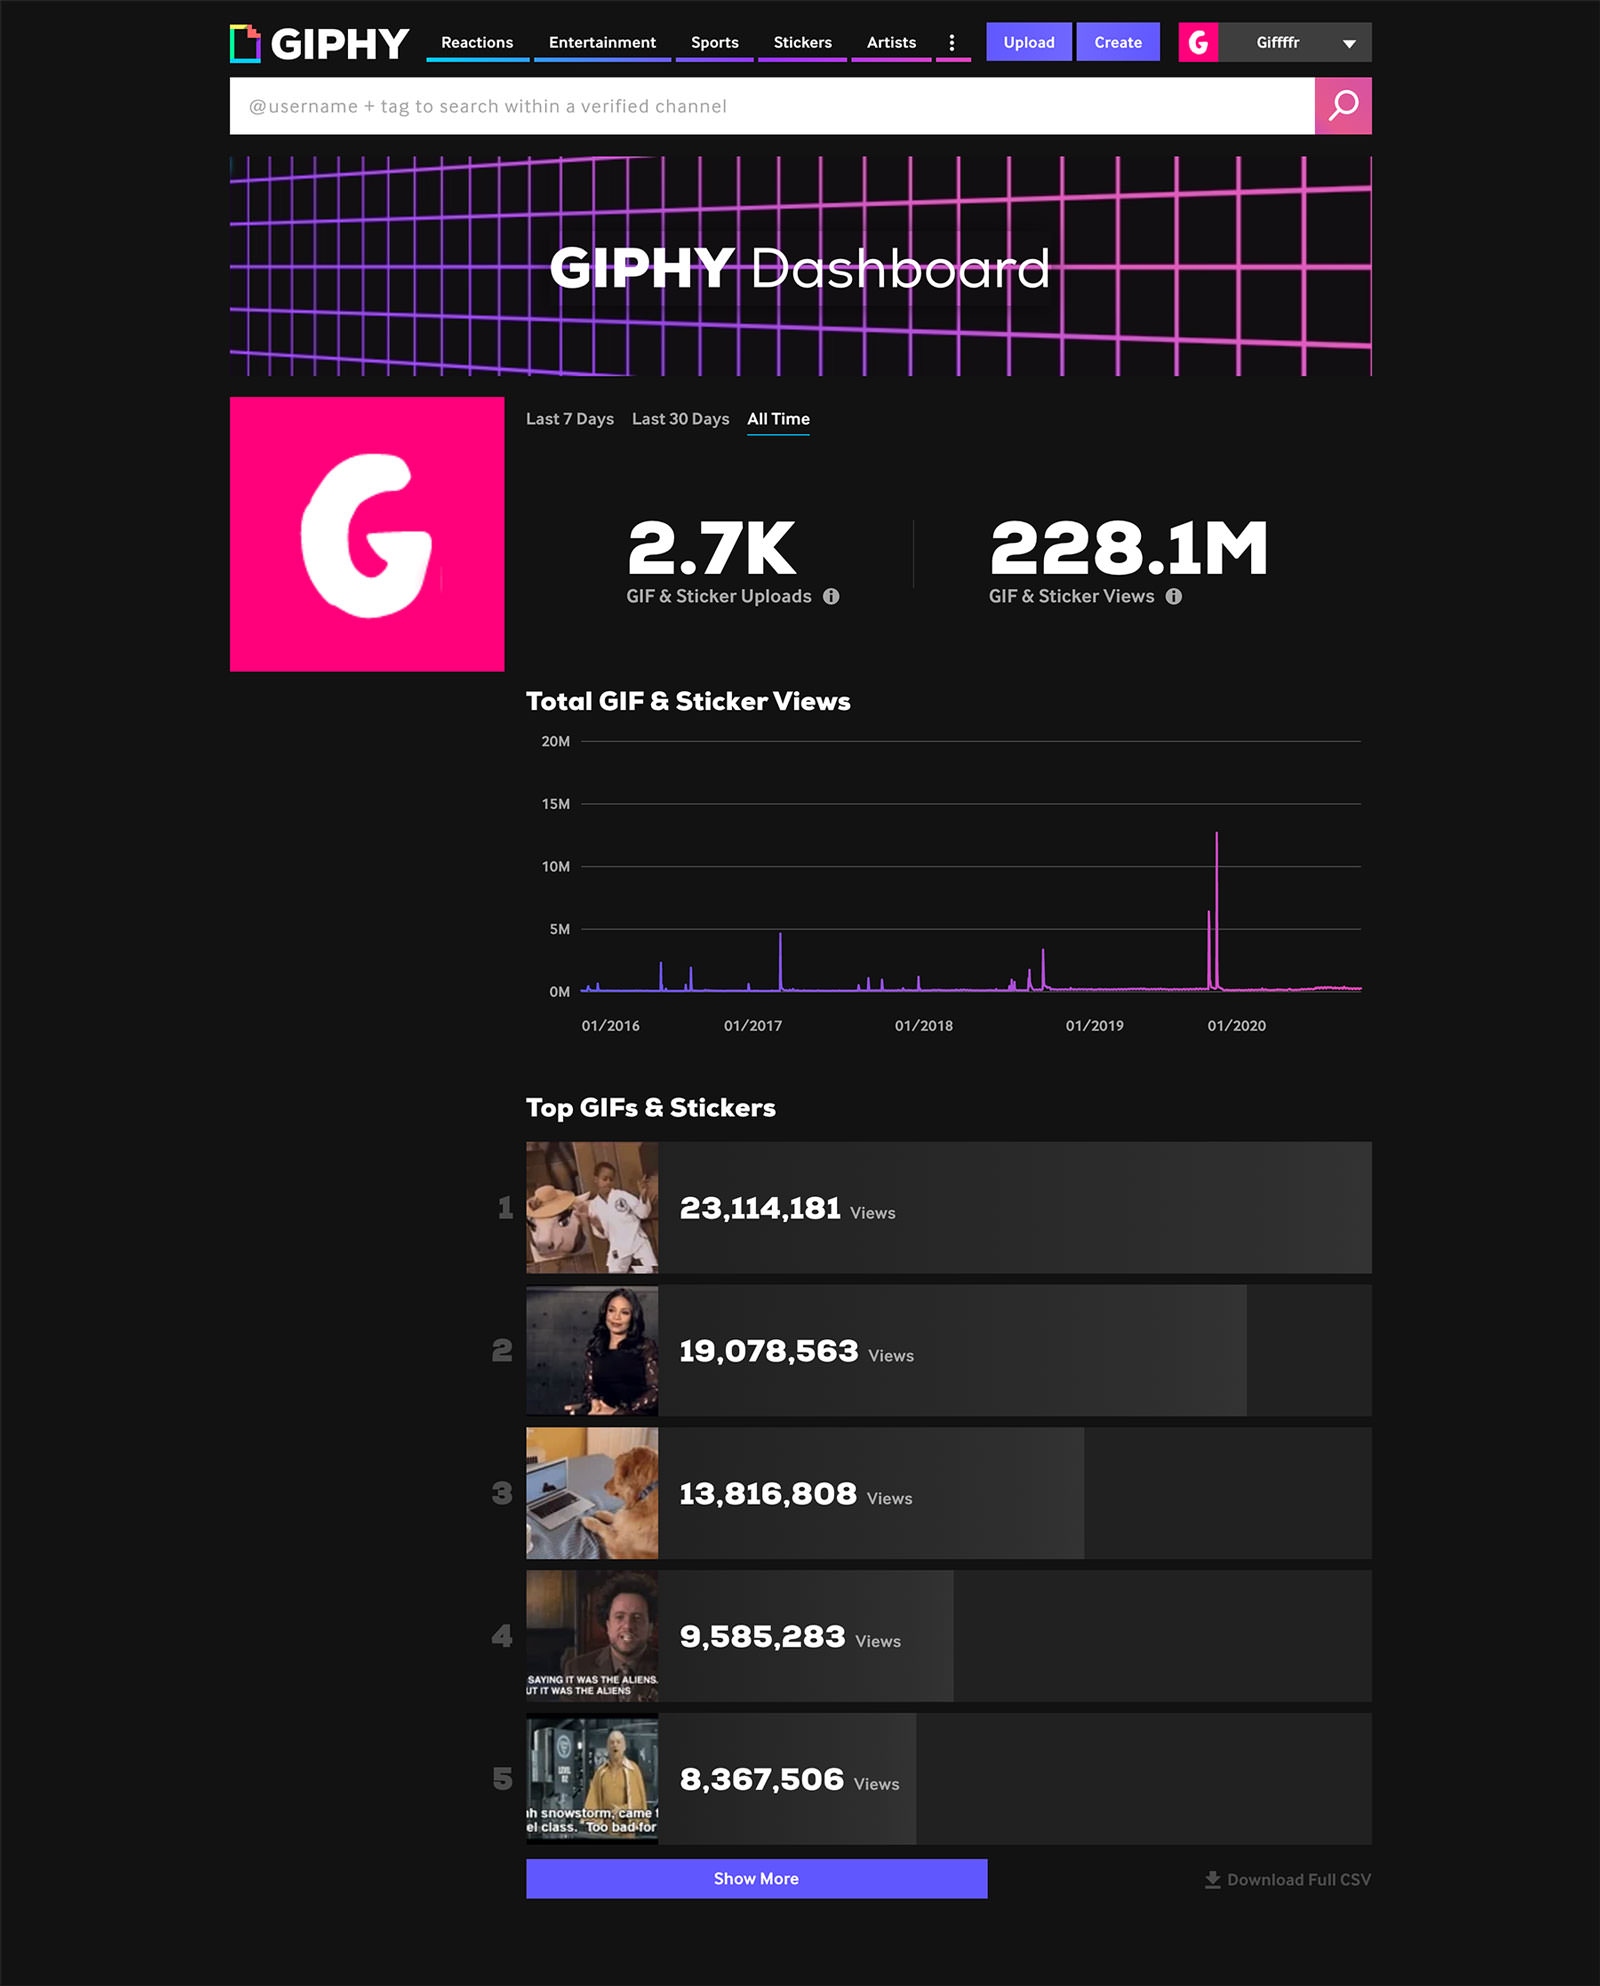 GIPHY Dashboard screenshot showing GIFFFFR stats - 2.7 thousand GIF uploads and 228.1 million GIF views, with the top GIF having over 23 million views